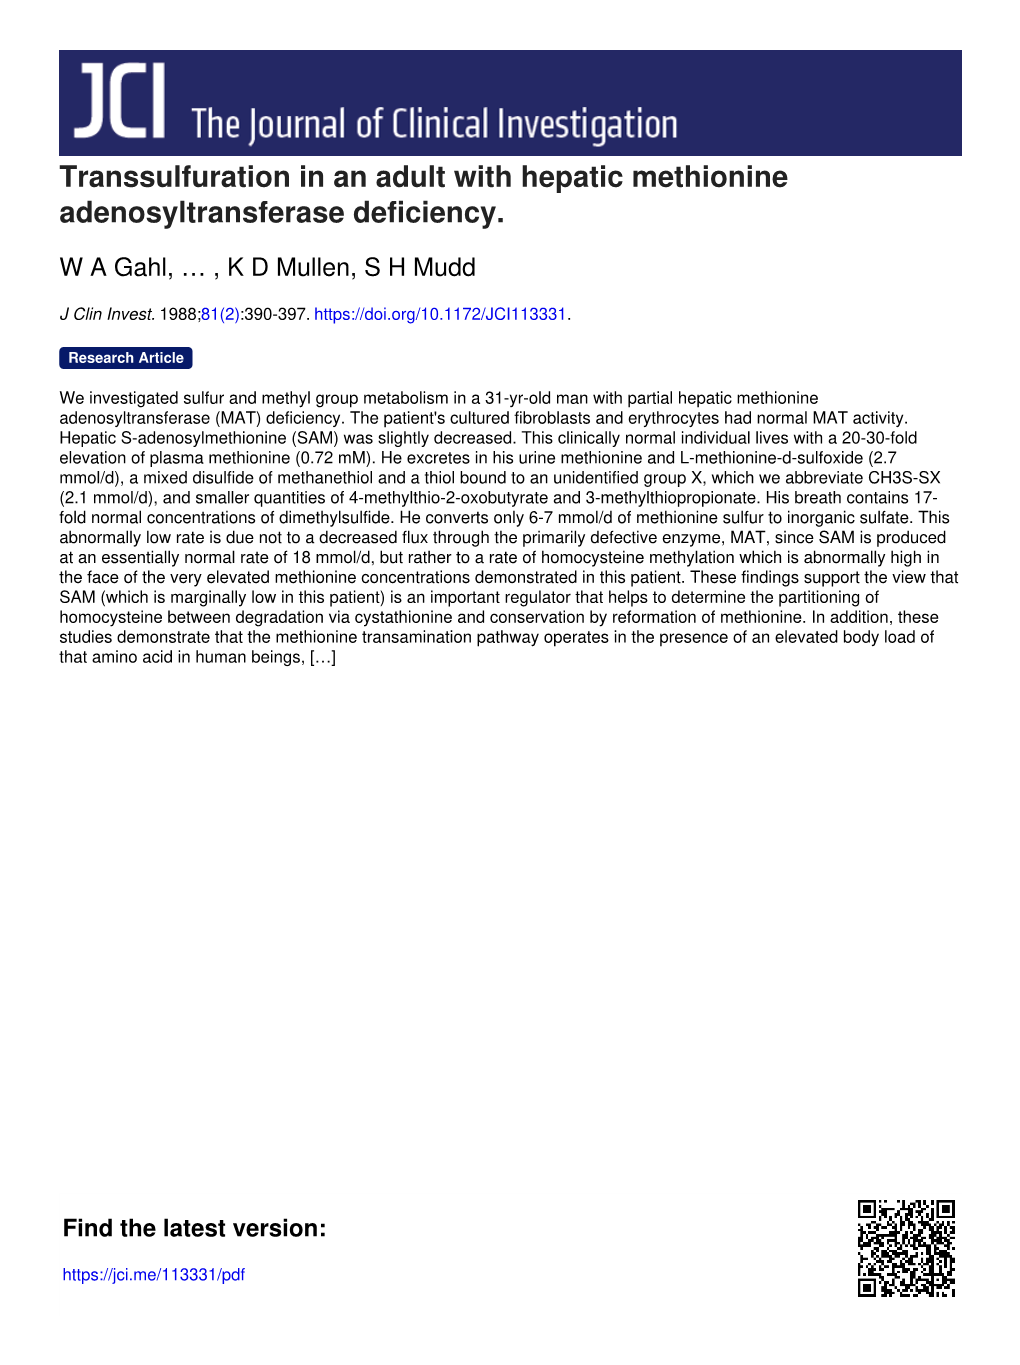 Transsulfuration in an Adult with Hepatic Methionine Adenosyltransferase Deficiency